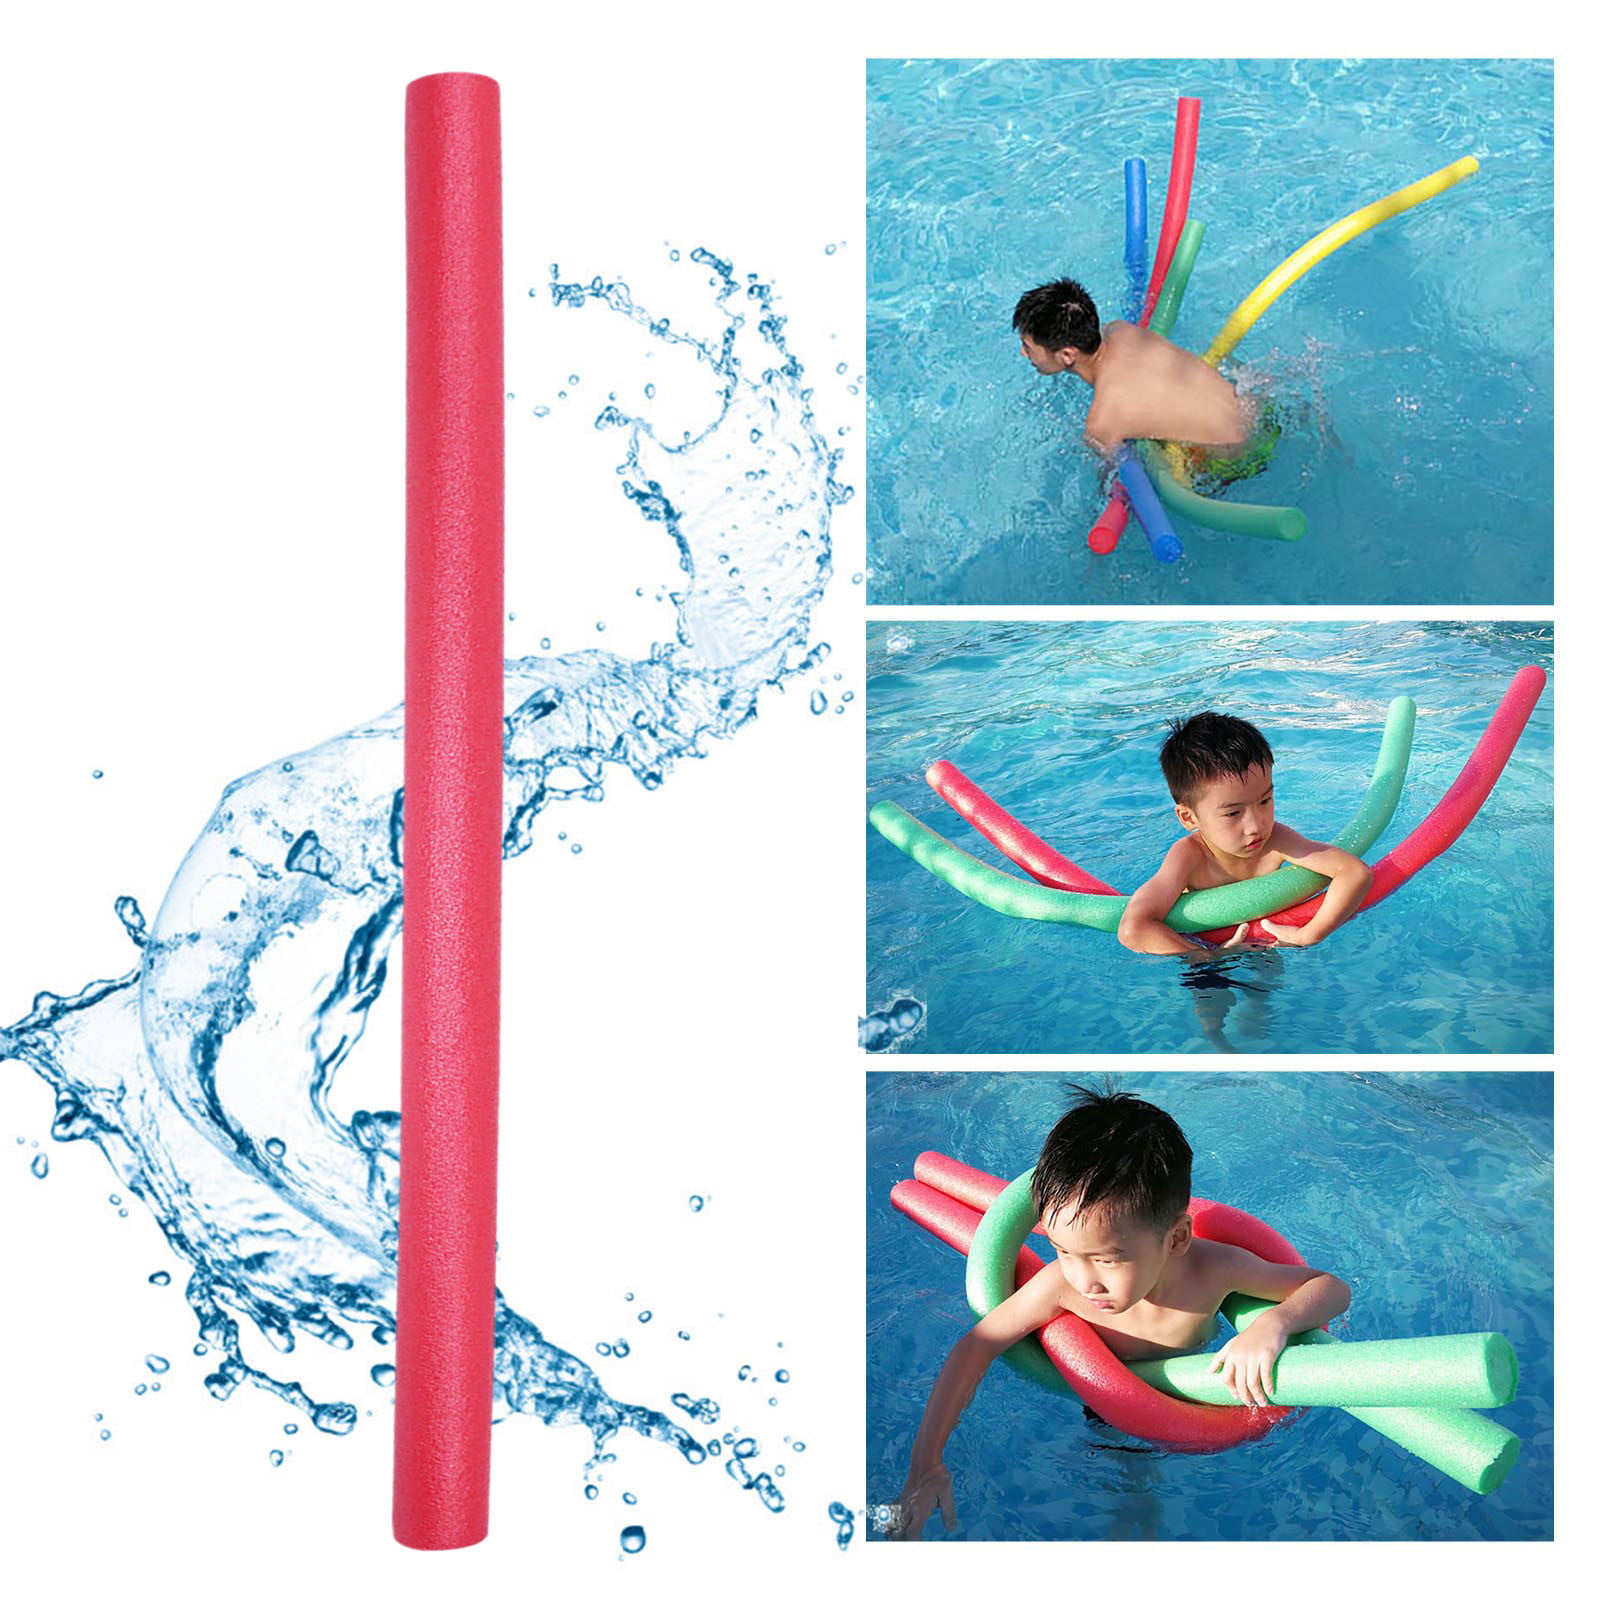 2 Per Package. Details about   Swimming Pool Swim Aids Brand New Sealed for ages 4 and up 